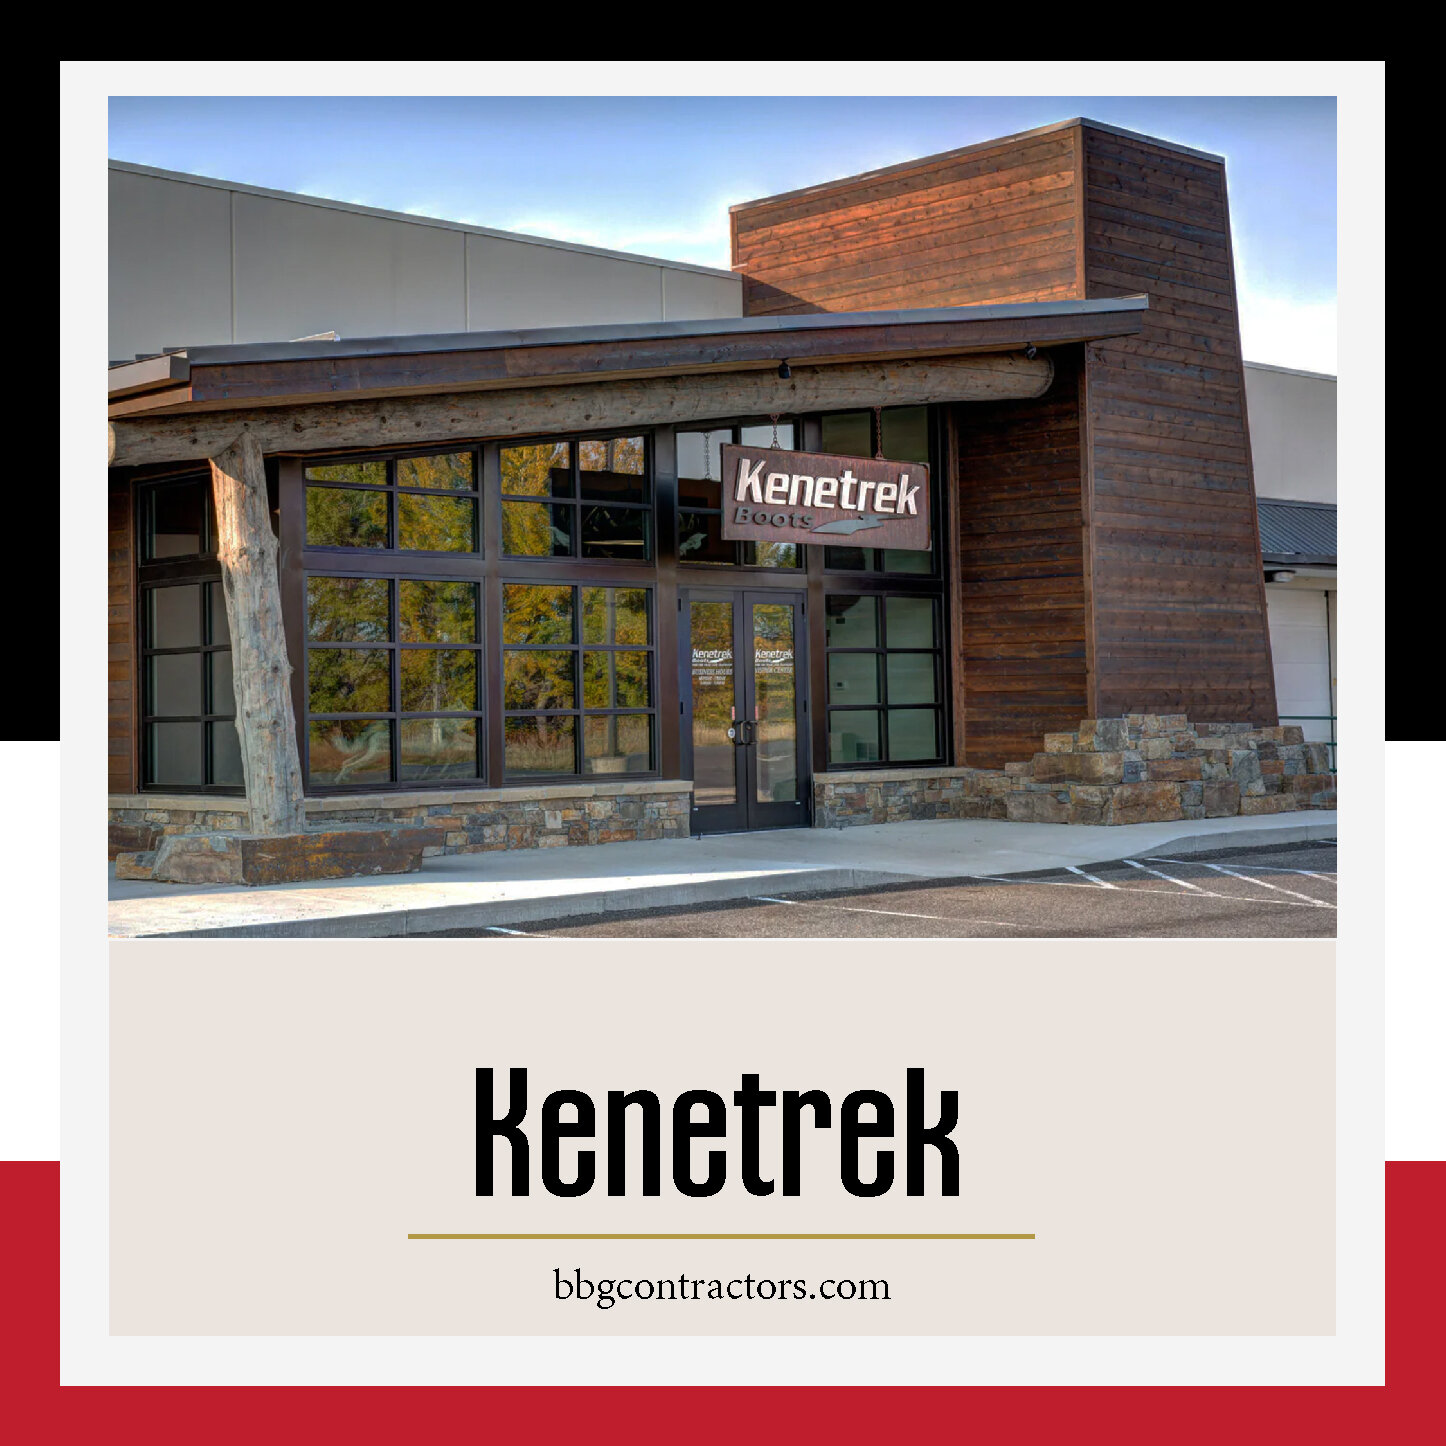 The Kenetrek project in Bozeman was near and dear to our hunter hearts!  The remodel details incorporated the brand of the Kenetrek Boots and the hunting passion of the owner with over 60 mounts, including &ldquo;Sheep Mountain&rdquo;. The goal was t